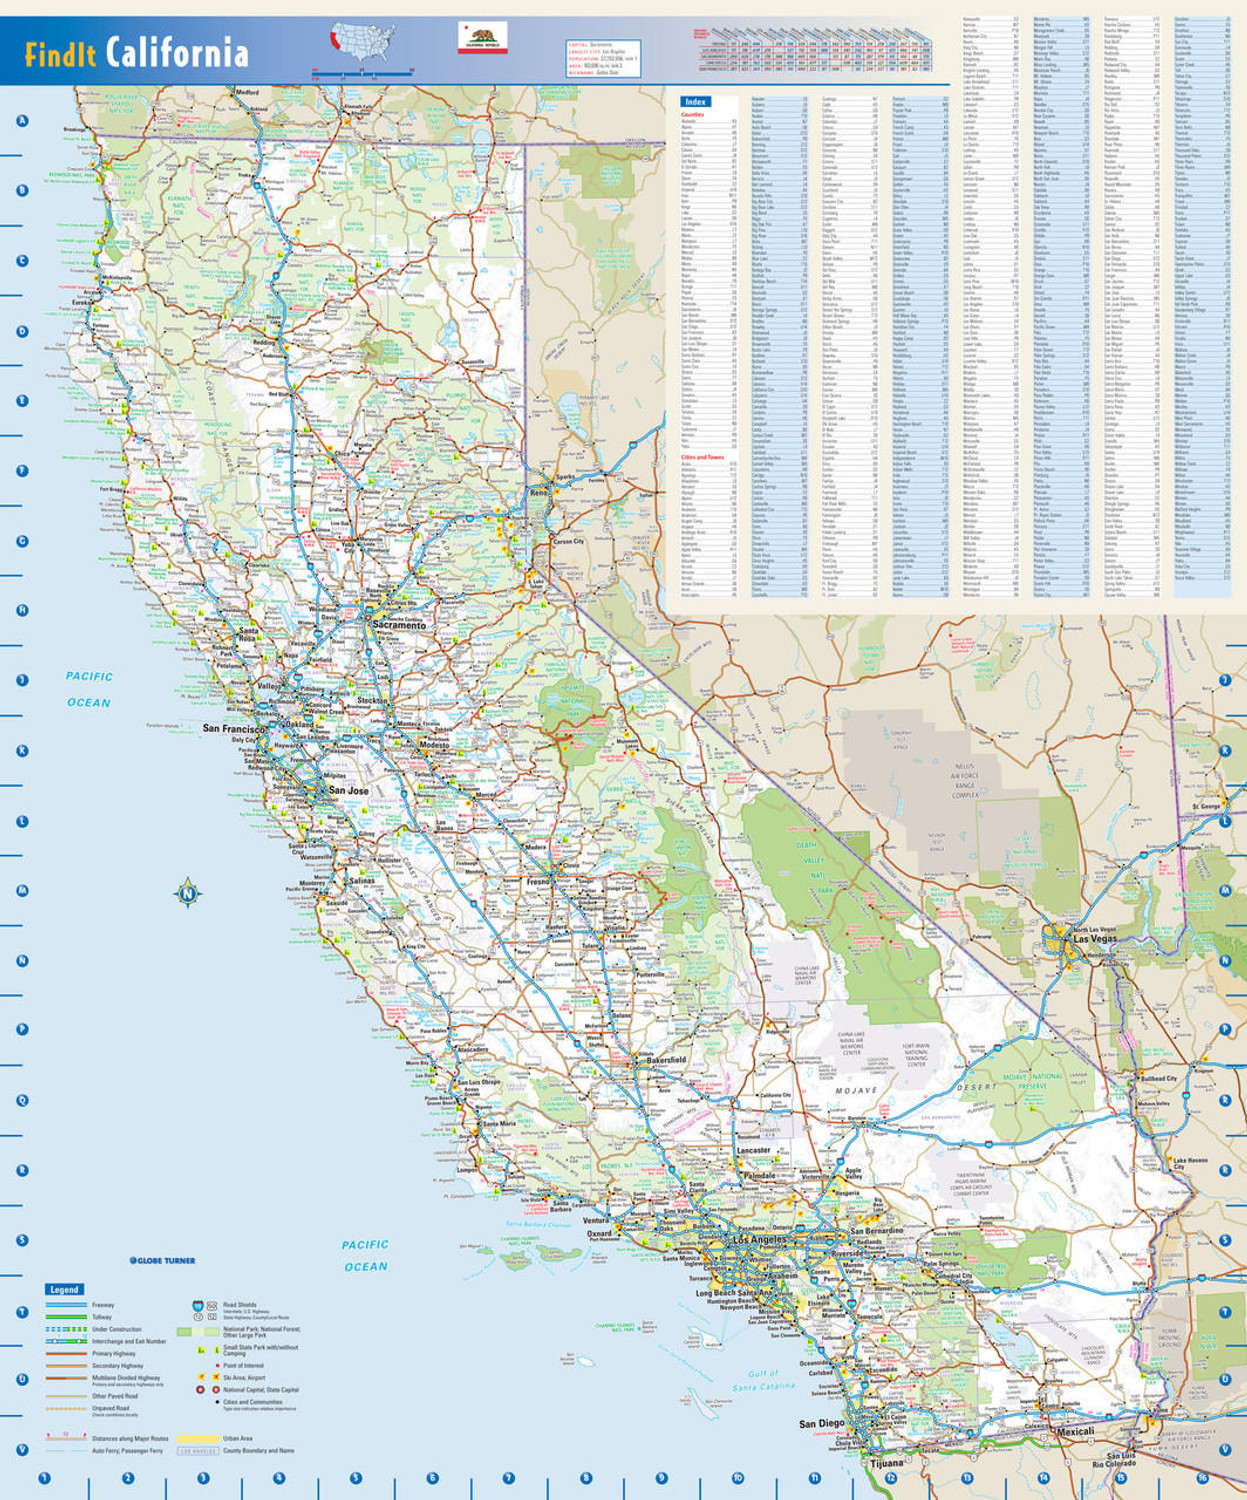 California Reference Wall Map, image 1, World Maps Online